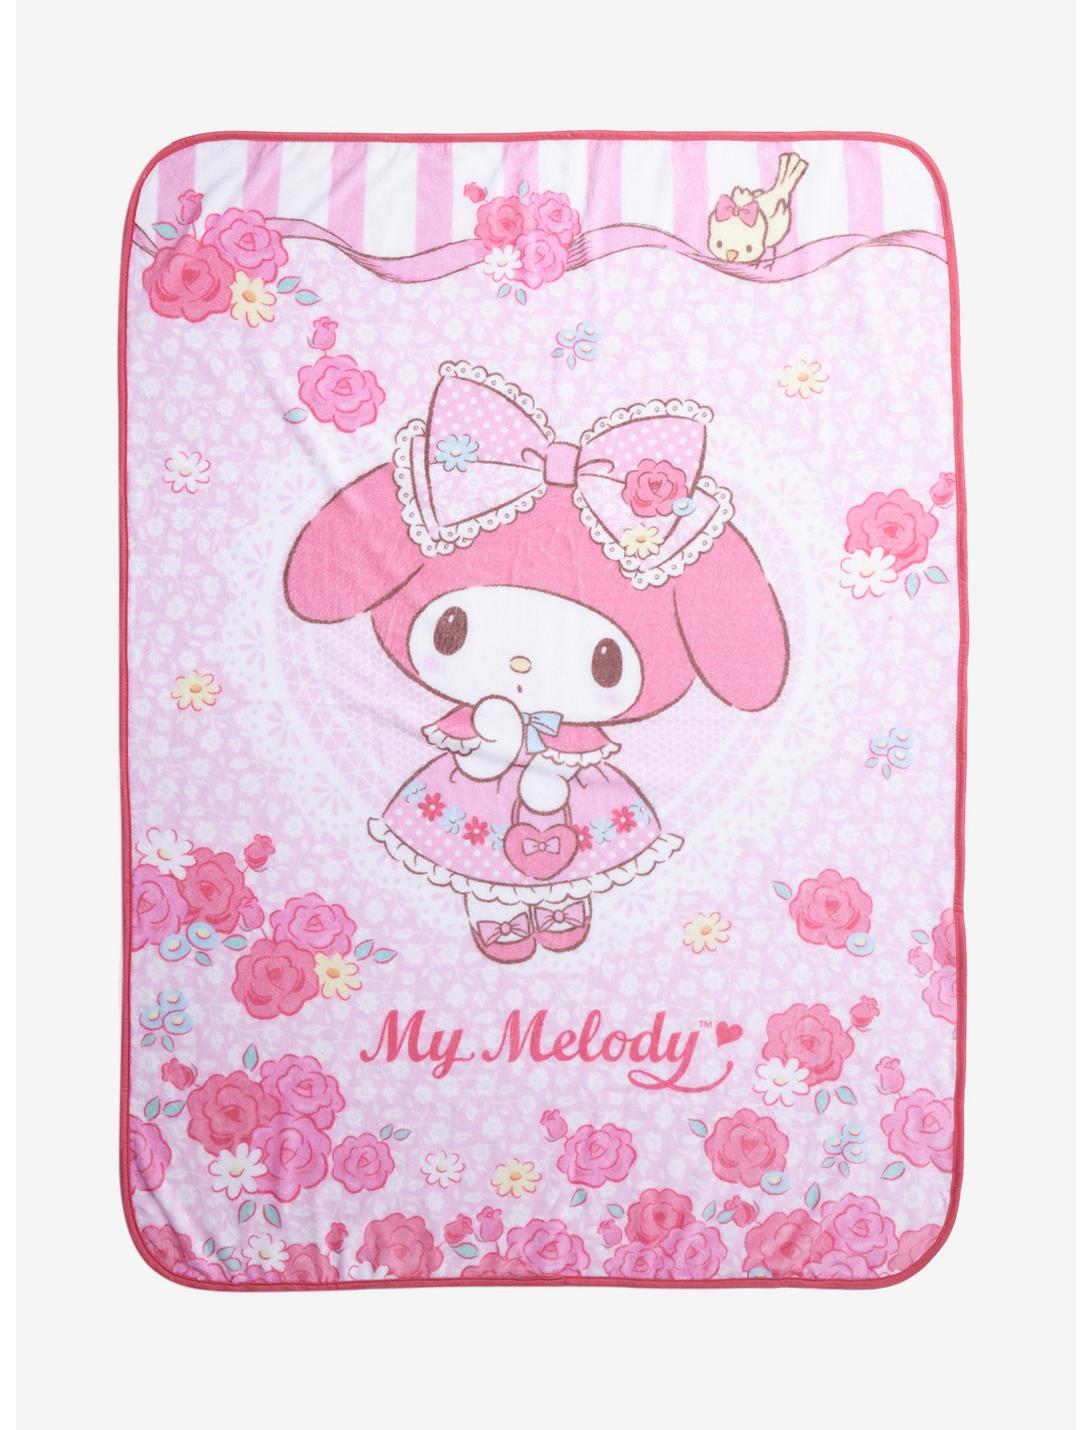 My Melody Pink Lace & Flowers Throw Blanket, , hi-res